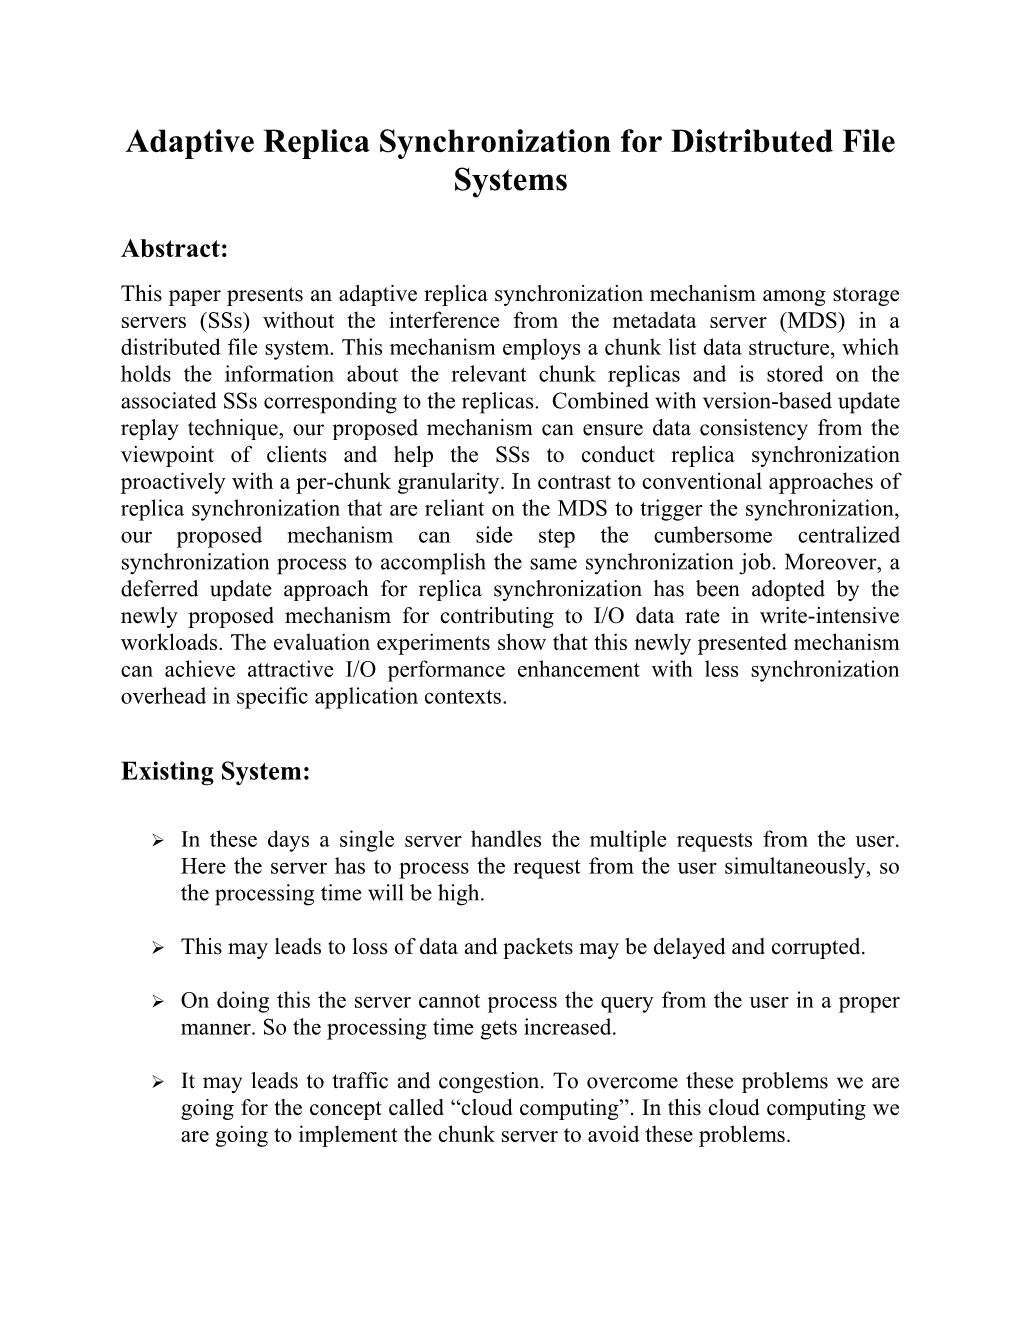 Adaptive Replica Synchronizationfor Distributed File Systems